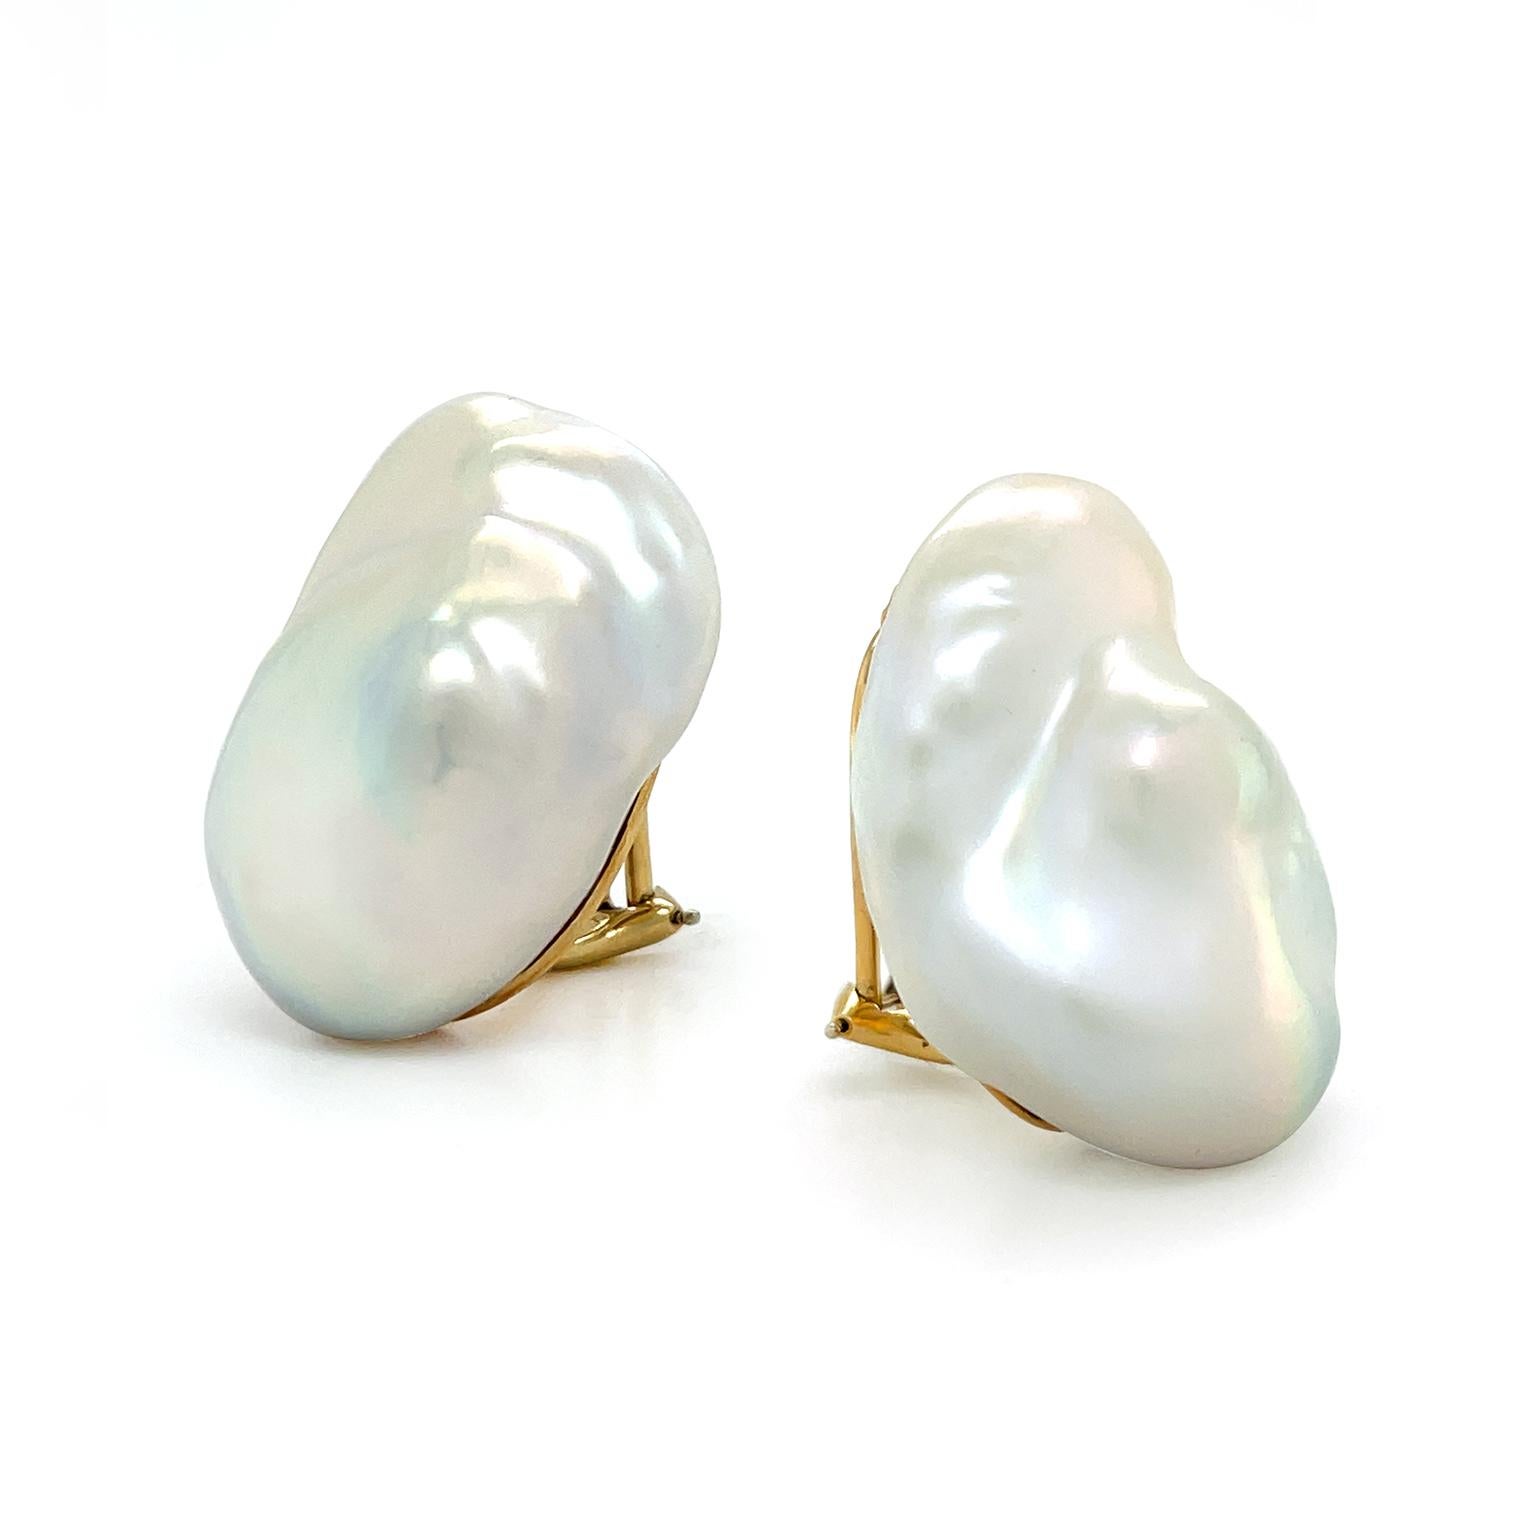 The chromatic singularity of baroque pearls is demonstrated in these earrings. Prized for their unique shapes, each of the oval-shaped pearls reflects soft multicolored hues and shadows across their varied valleys. The total weight of the pearls is